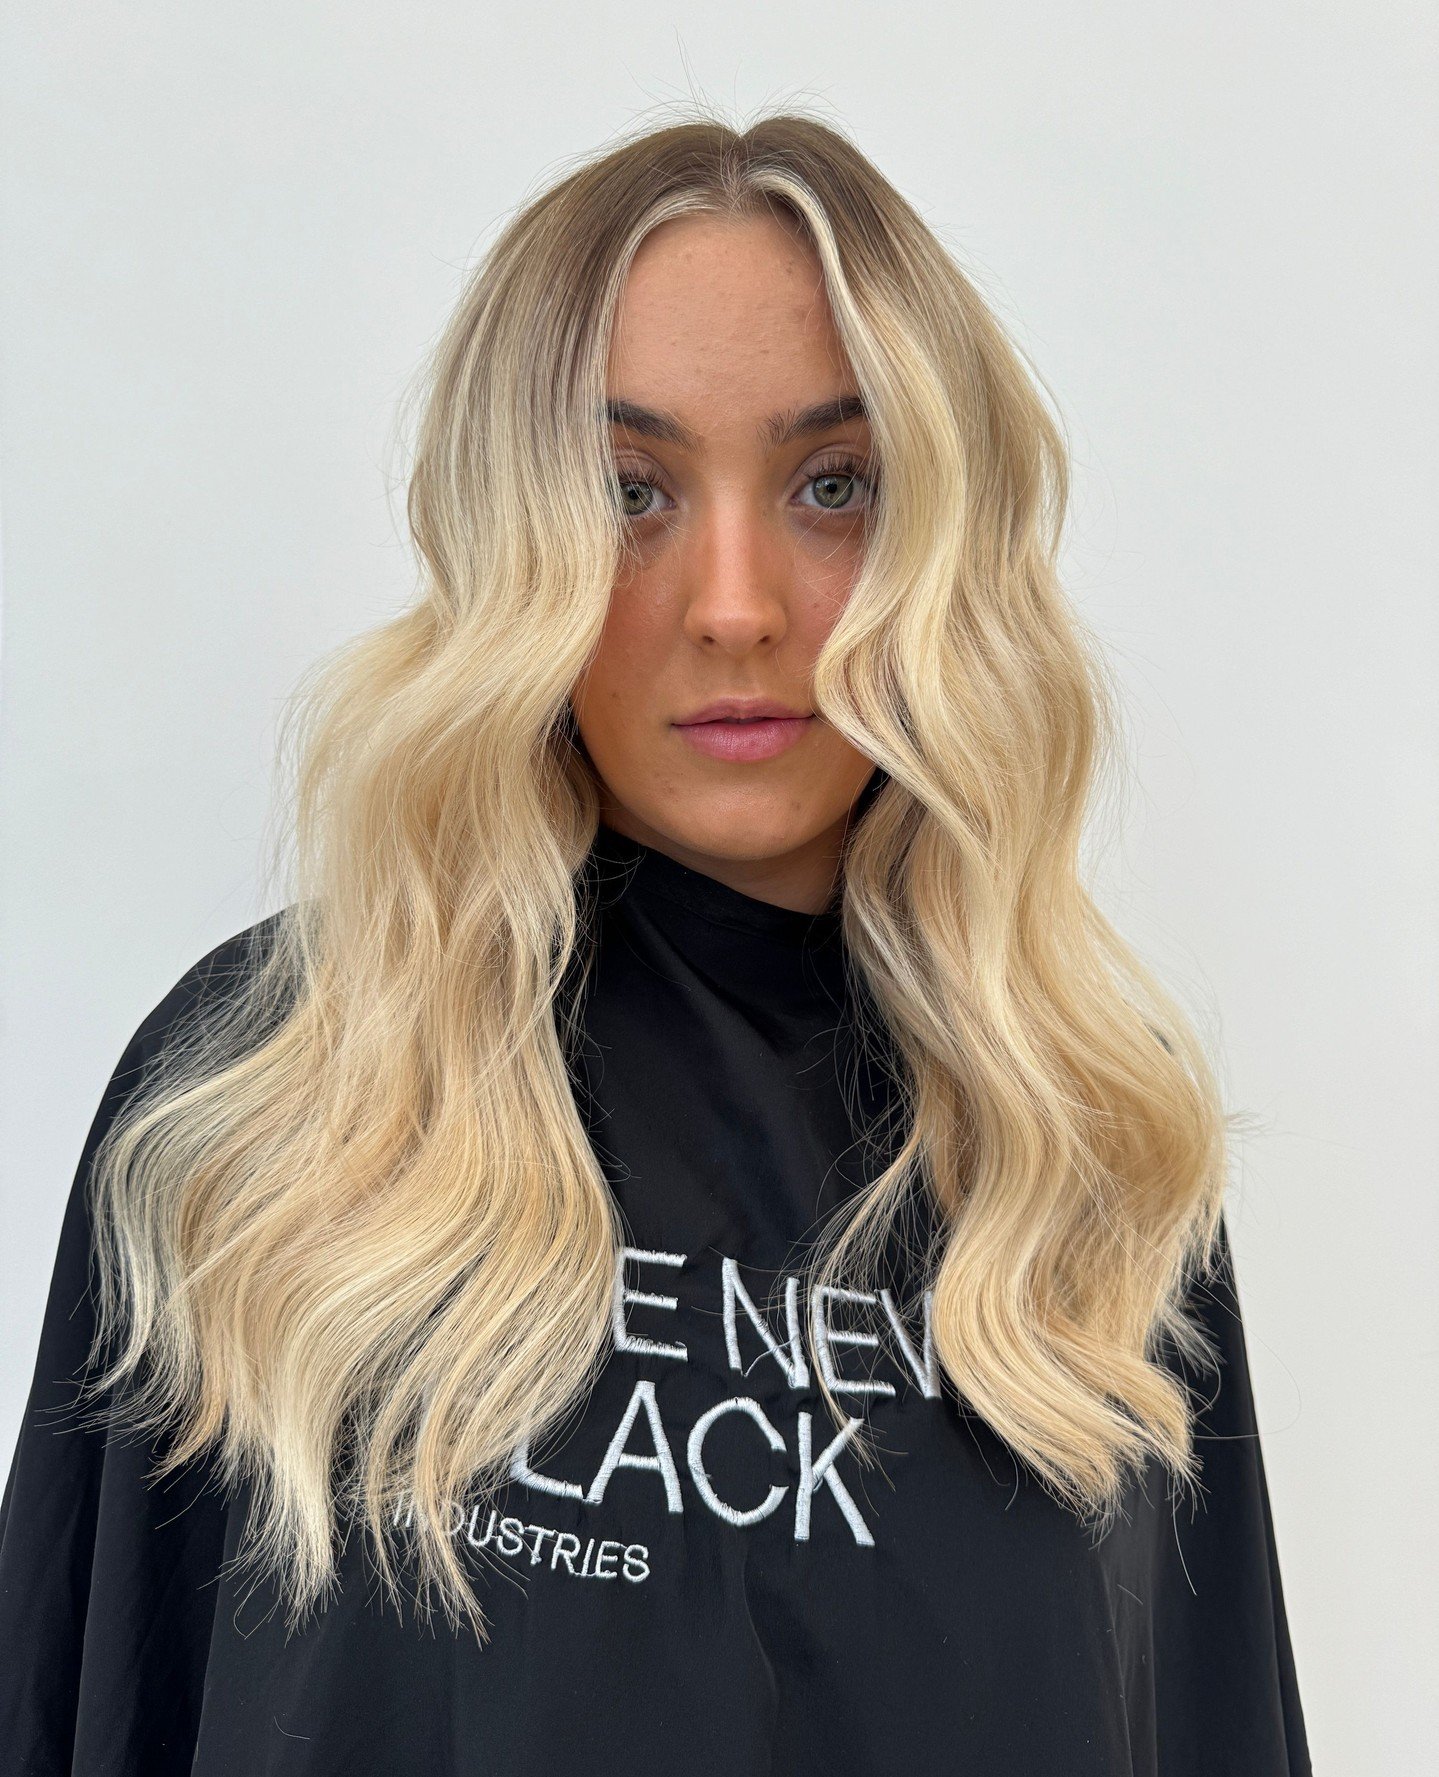 Power Couple - A @wellapro_anz blonde paired with @greatlengthsaus keratin bonds 🪄⁠
⁠
Book your consultation via link in bio for your healthiest, thickest hair yet ✨⁠
⁠
⁠
#lovetnb #thenewblackindustries #selfmadecollab #newcastleau #newcastlesalon #